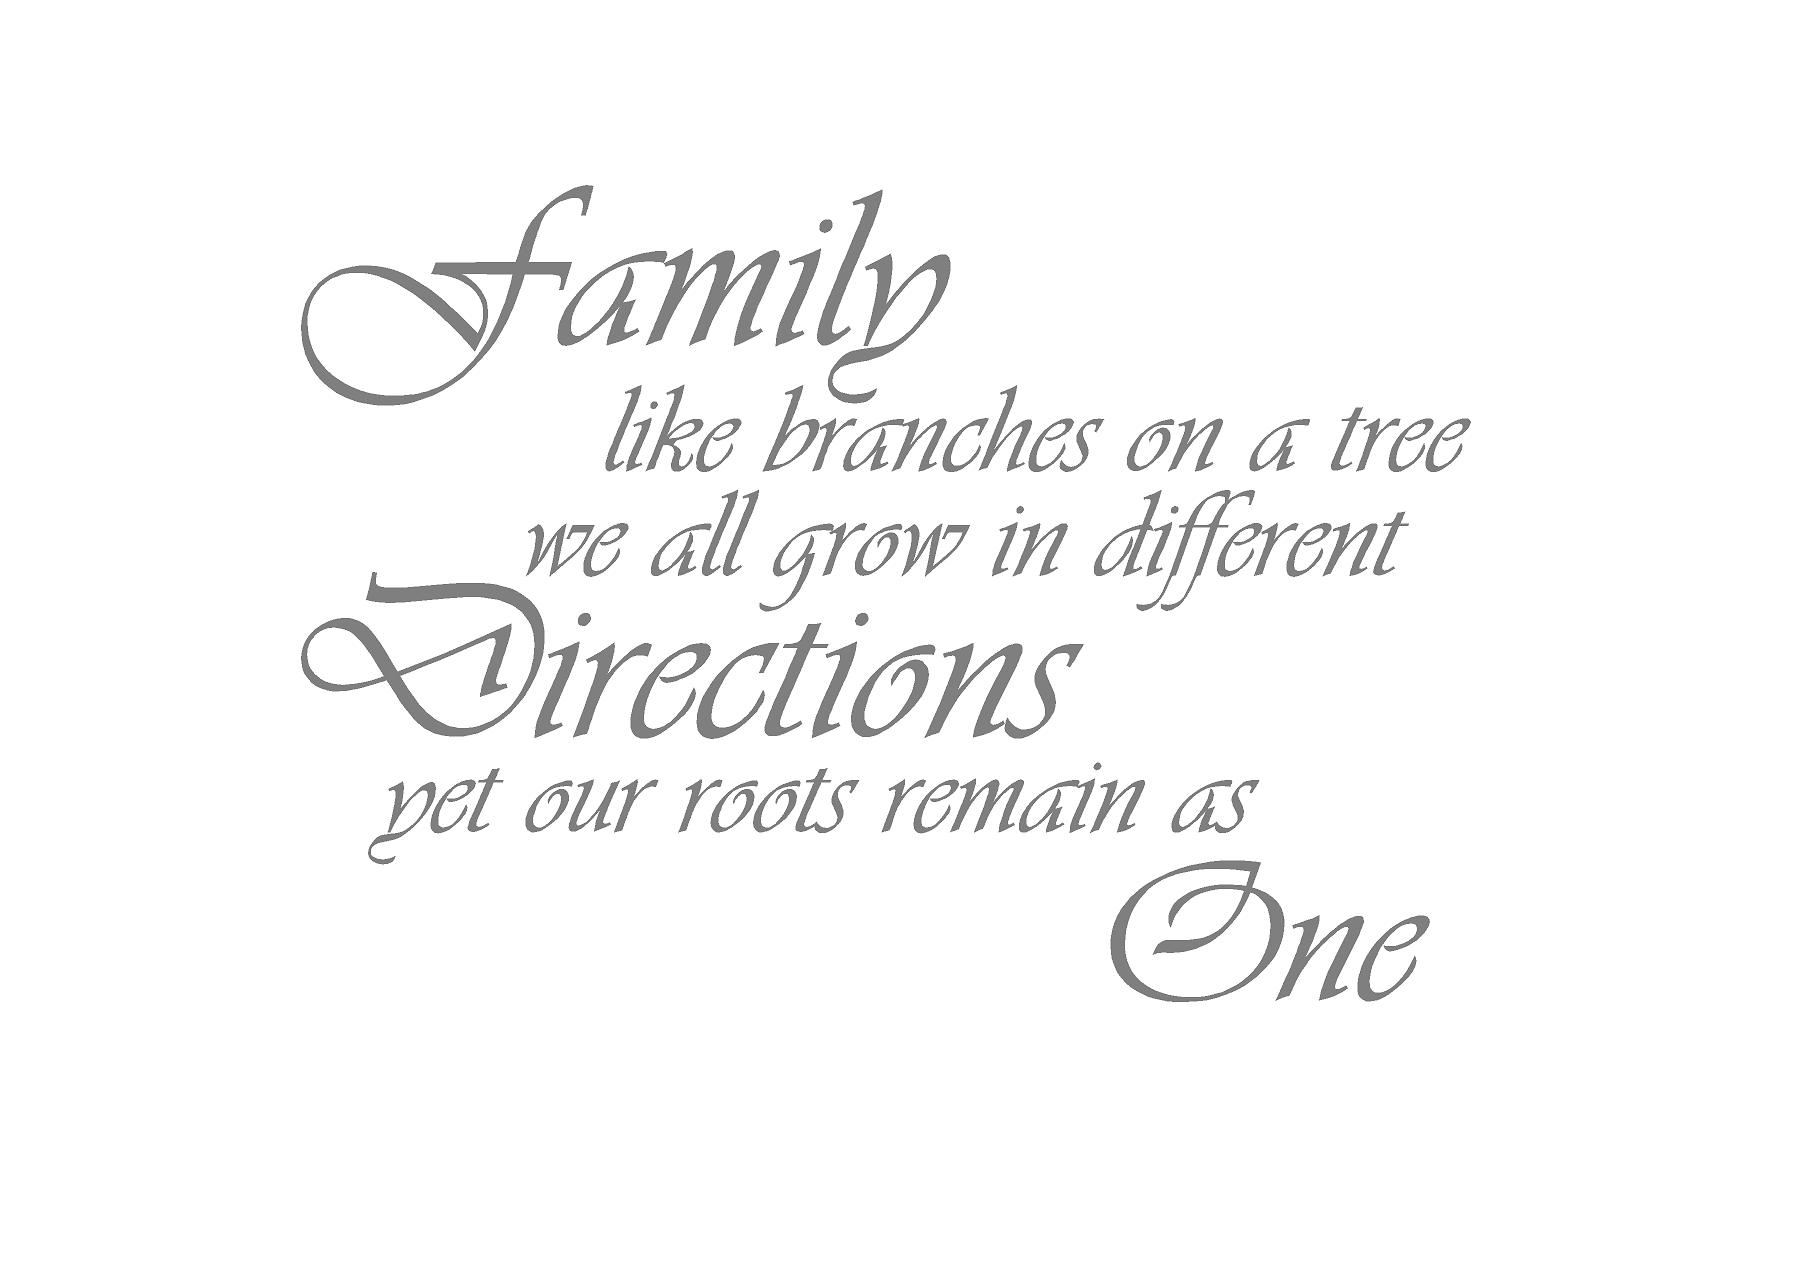 Family like a branches on a tree